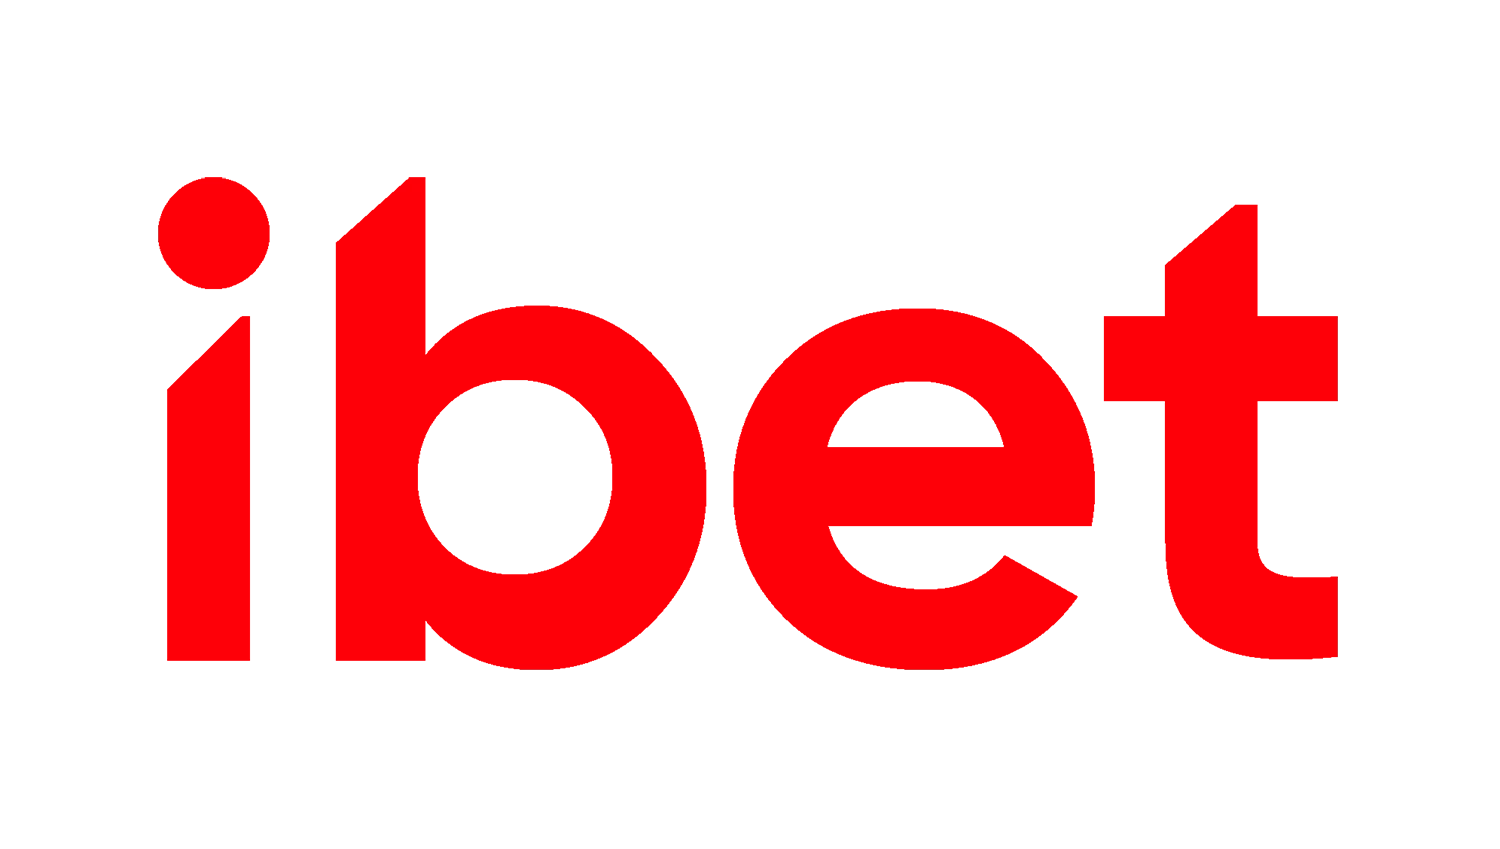 Play online casino and bet on sports with iBet.